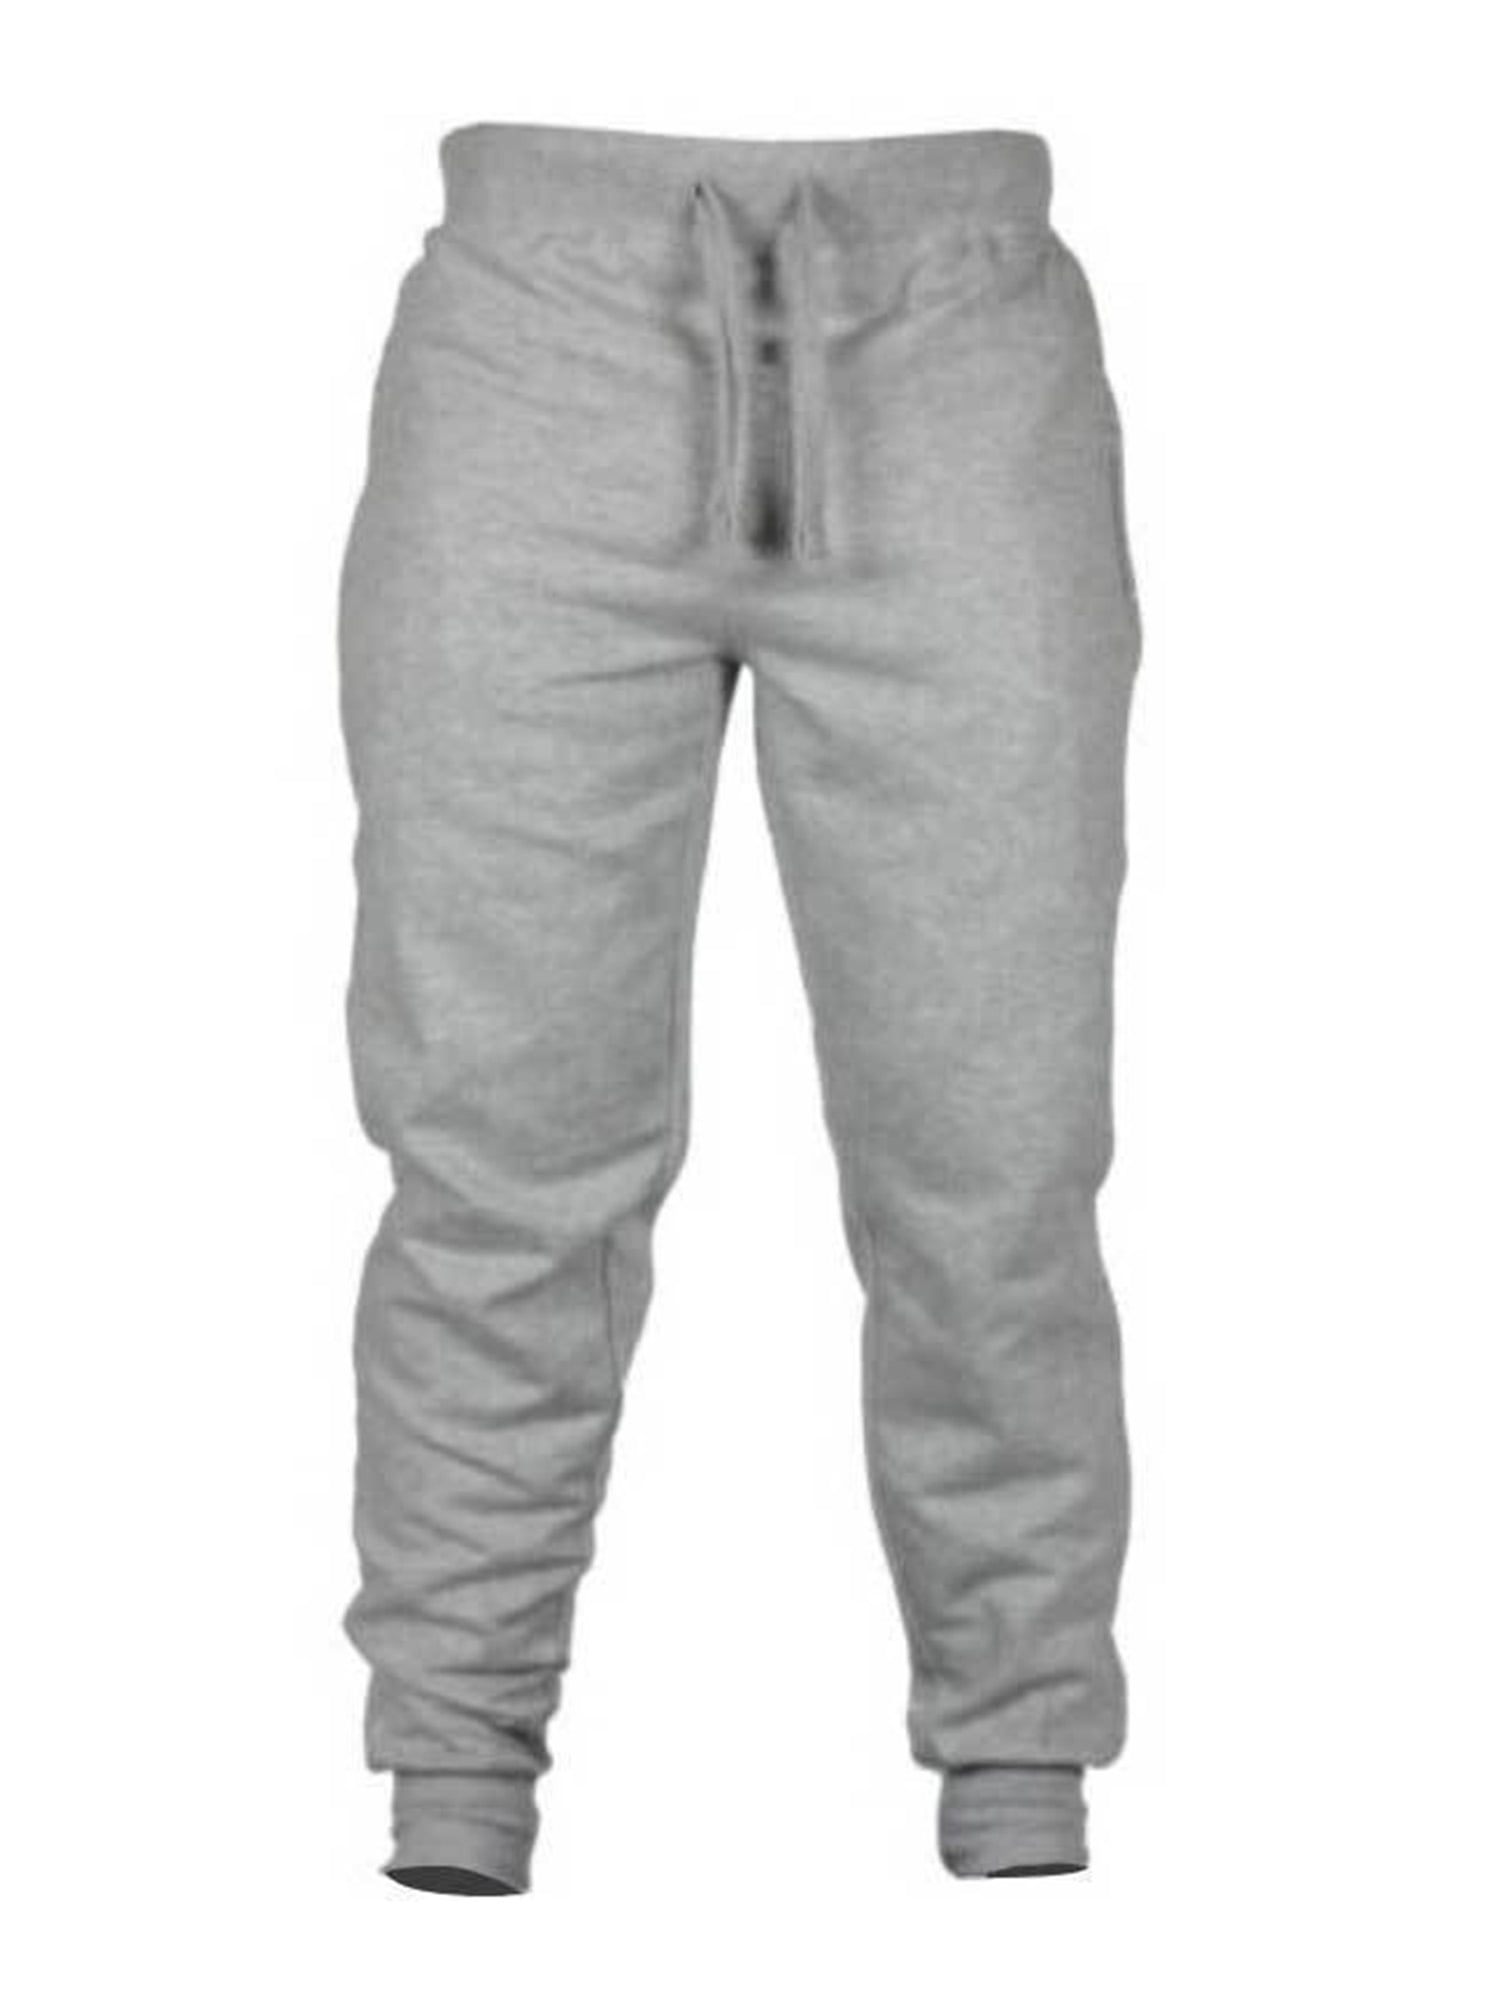 Mens Closed Bottom Light Weight Joggers Sweatpants with Pockets Solid  Tapered Leg Drawstring Training Joggers Pants 